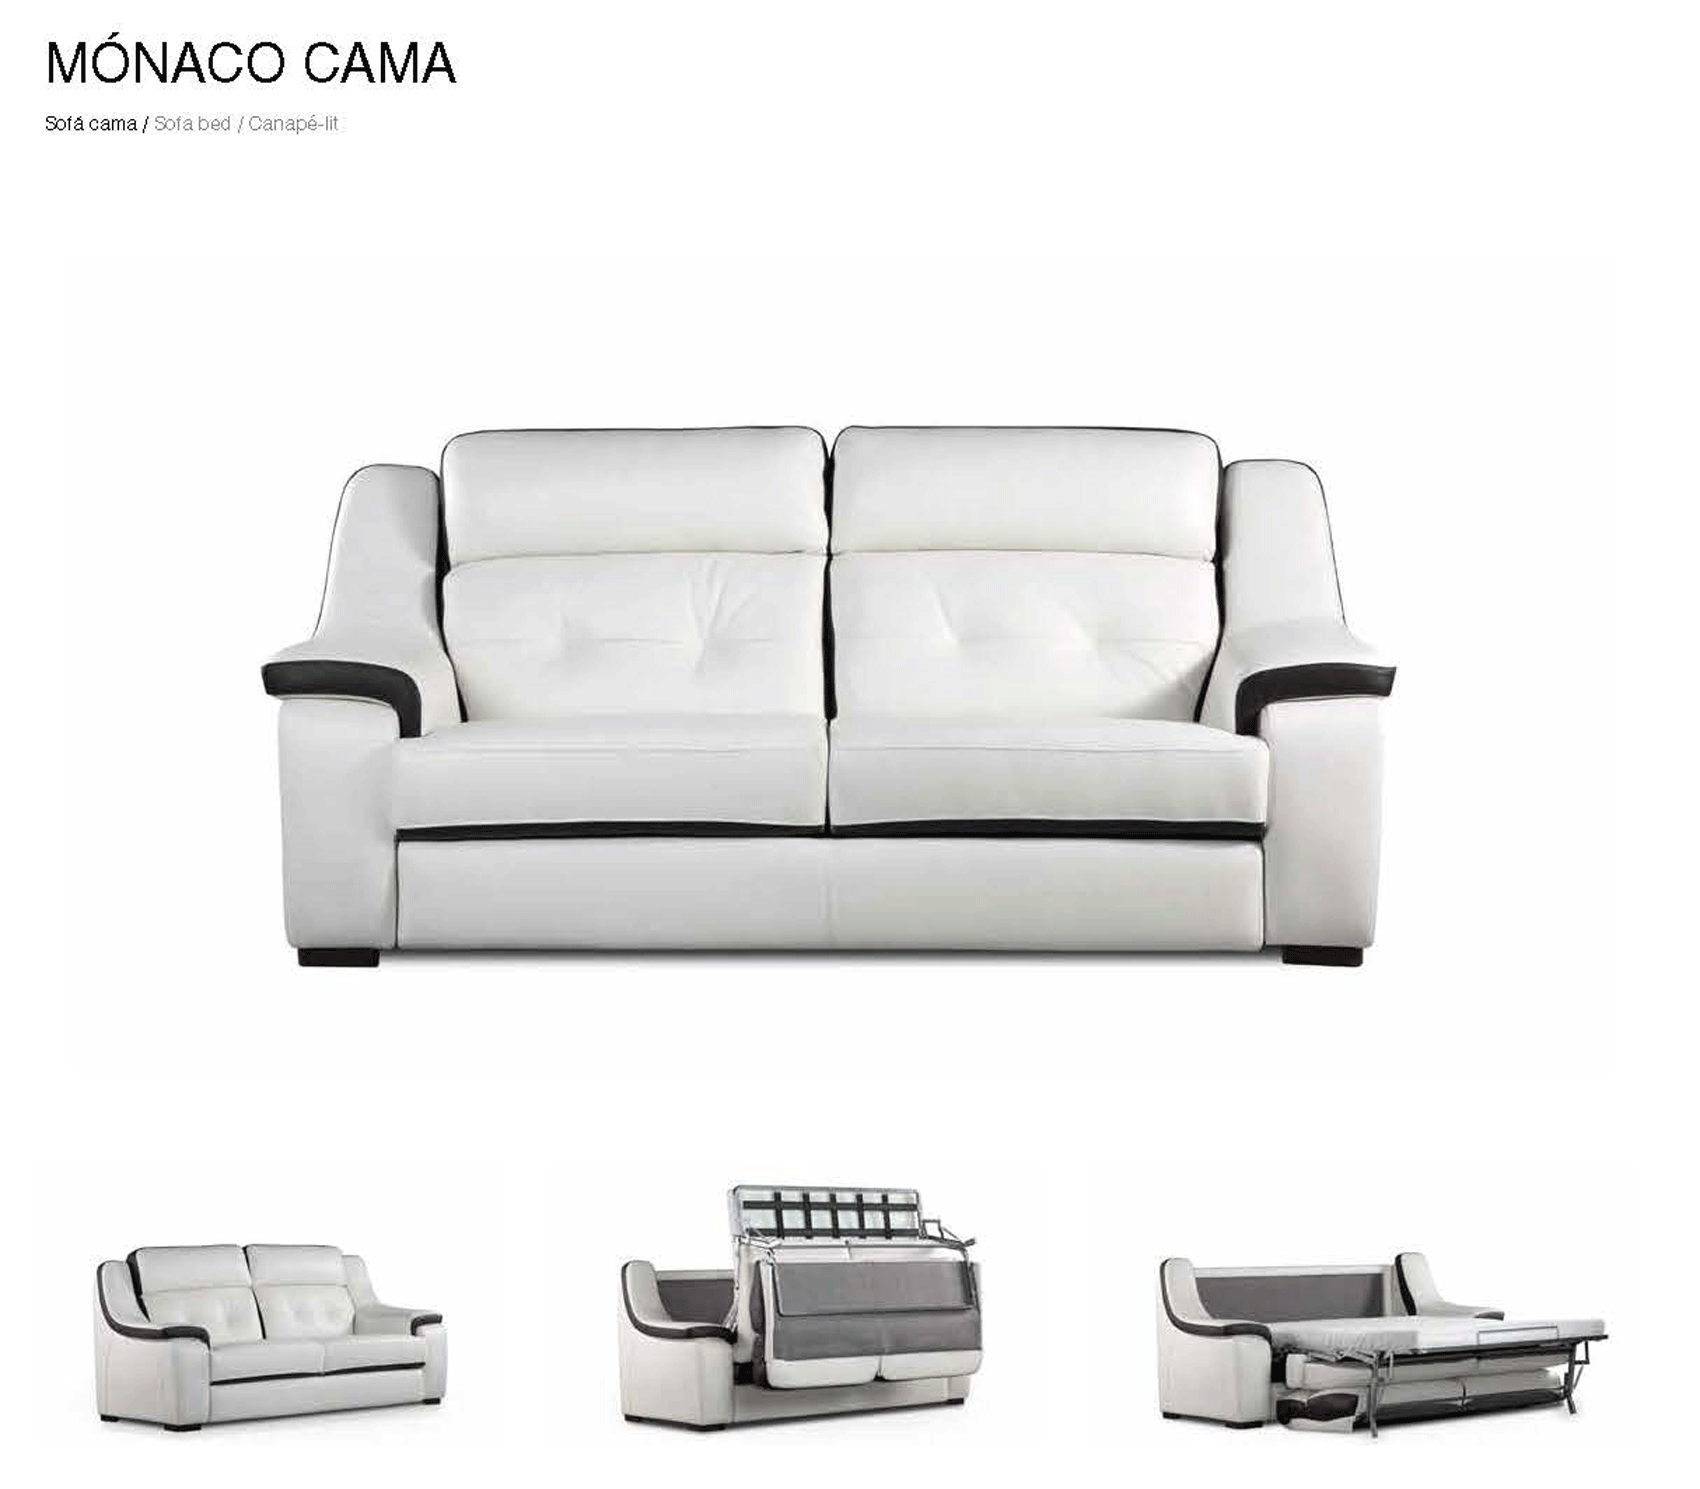 Living Room Furniture Sofas Loveseats and Chairs with Sleepers Monaco Sofa-bed